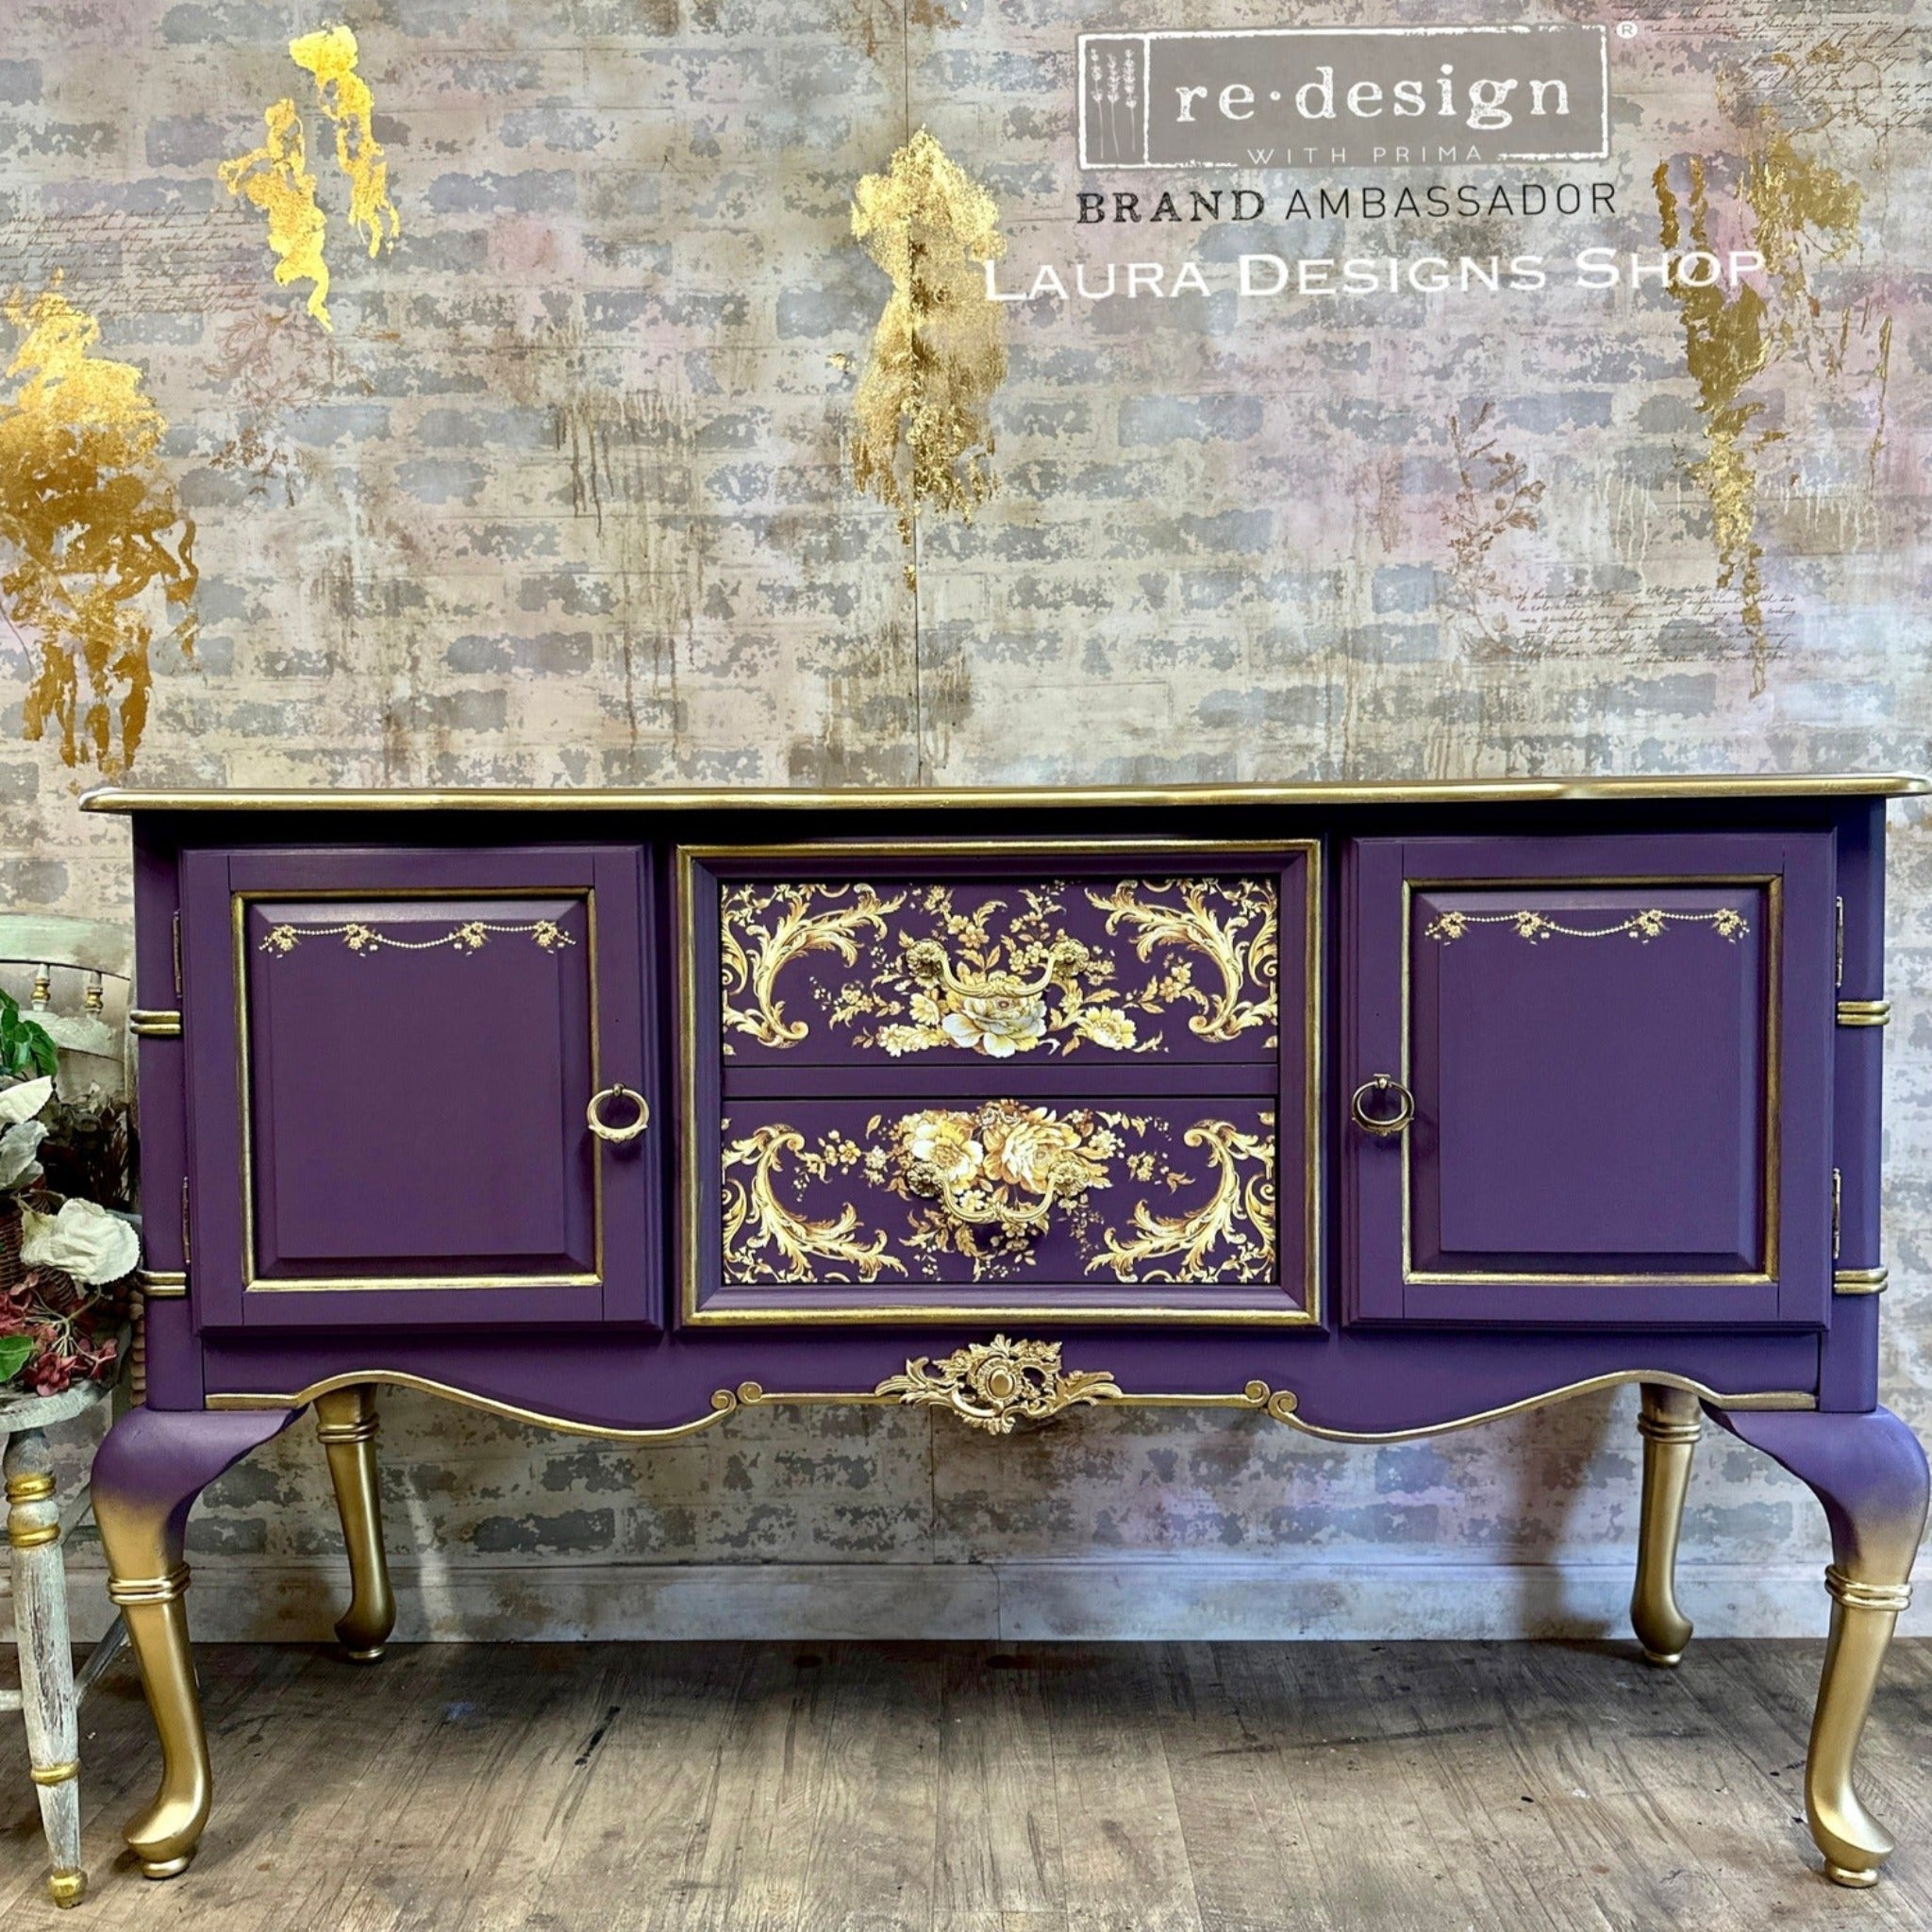 A vintage buffet table refurbished by Laura Designs Shop is painted a deep royal purple with gold accents and features ReDesign with Prima's Kacha Orleans transfer on the 2 center drawers.